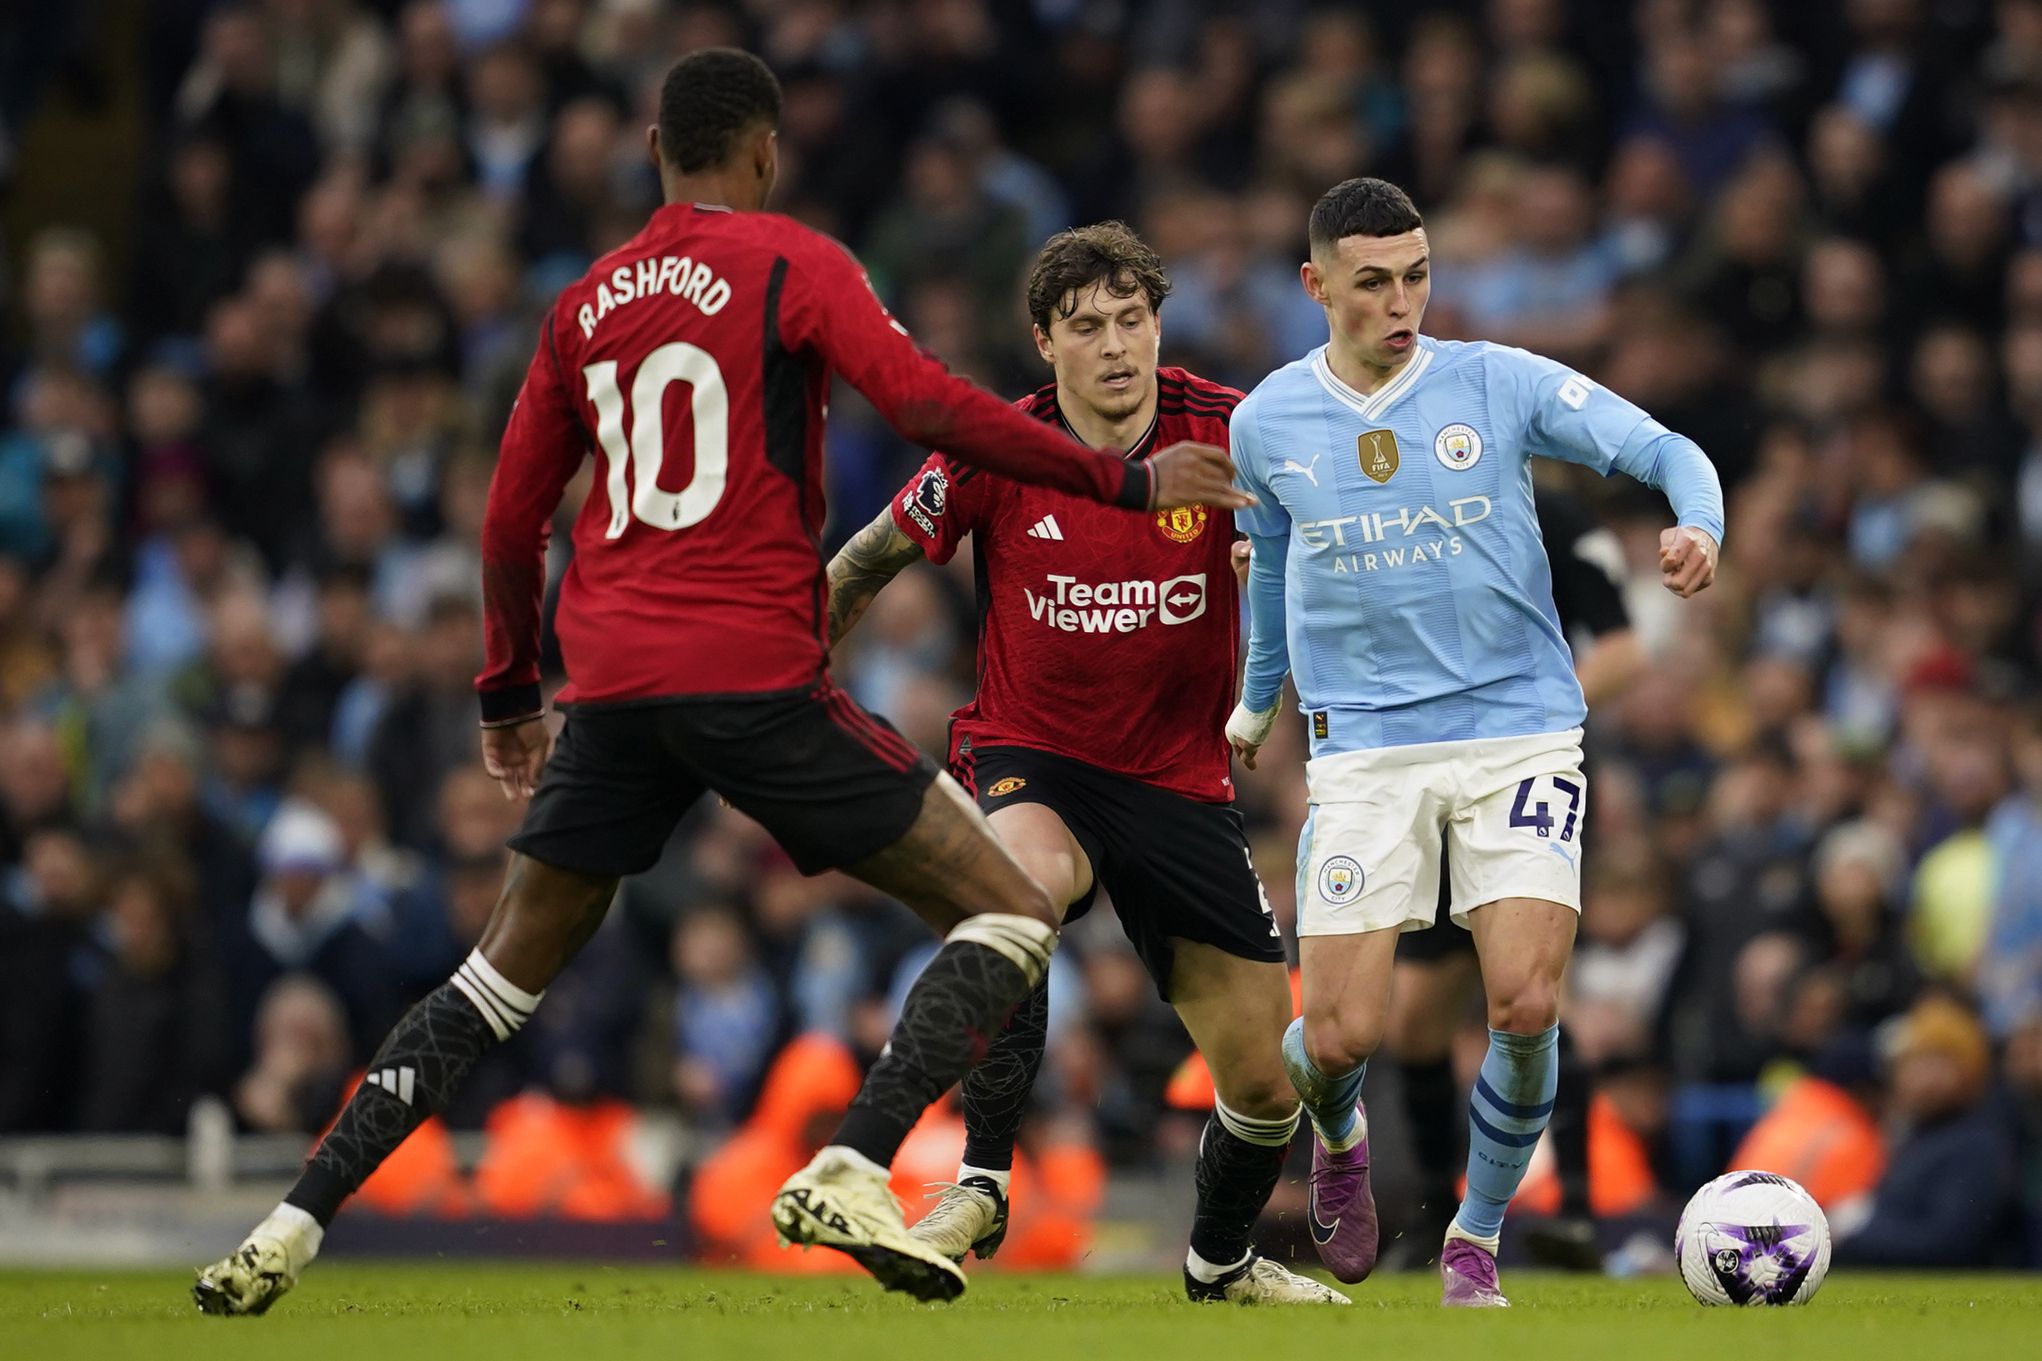 Phil Foden, right, controls the ball the ball as Manchester United's Marcus Rashford, left and Victor Lindelof challenge